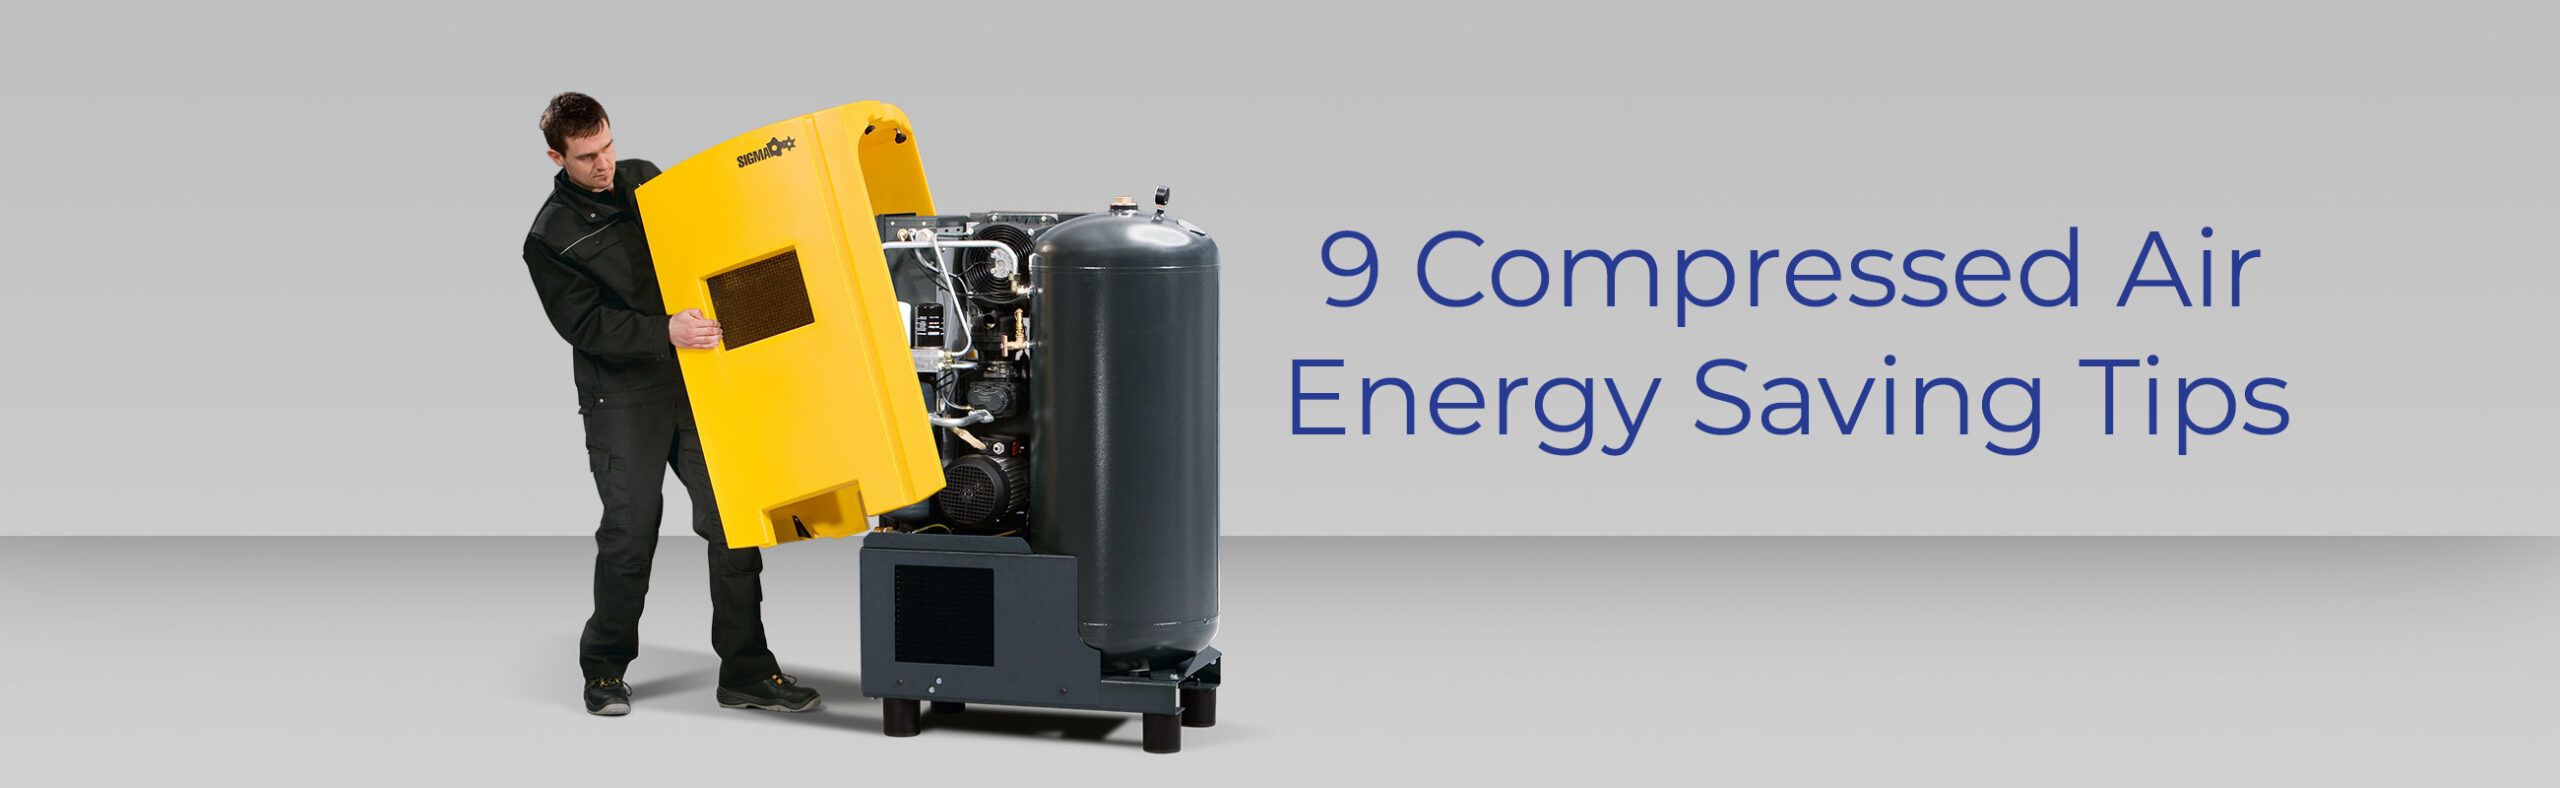 Compressed air, Energy Efficiency, Industrial Uses & Safety